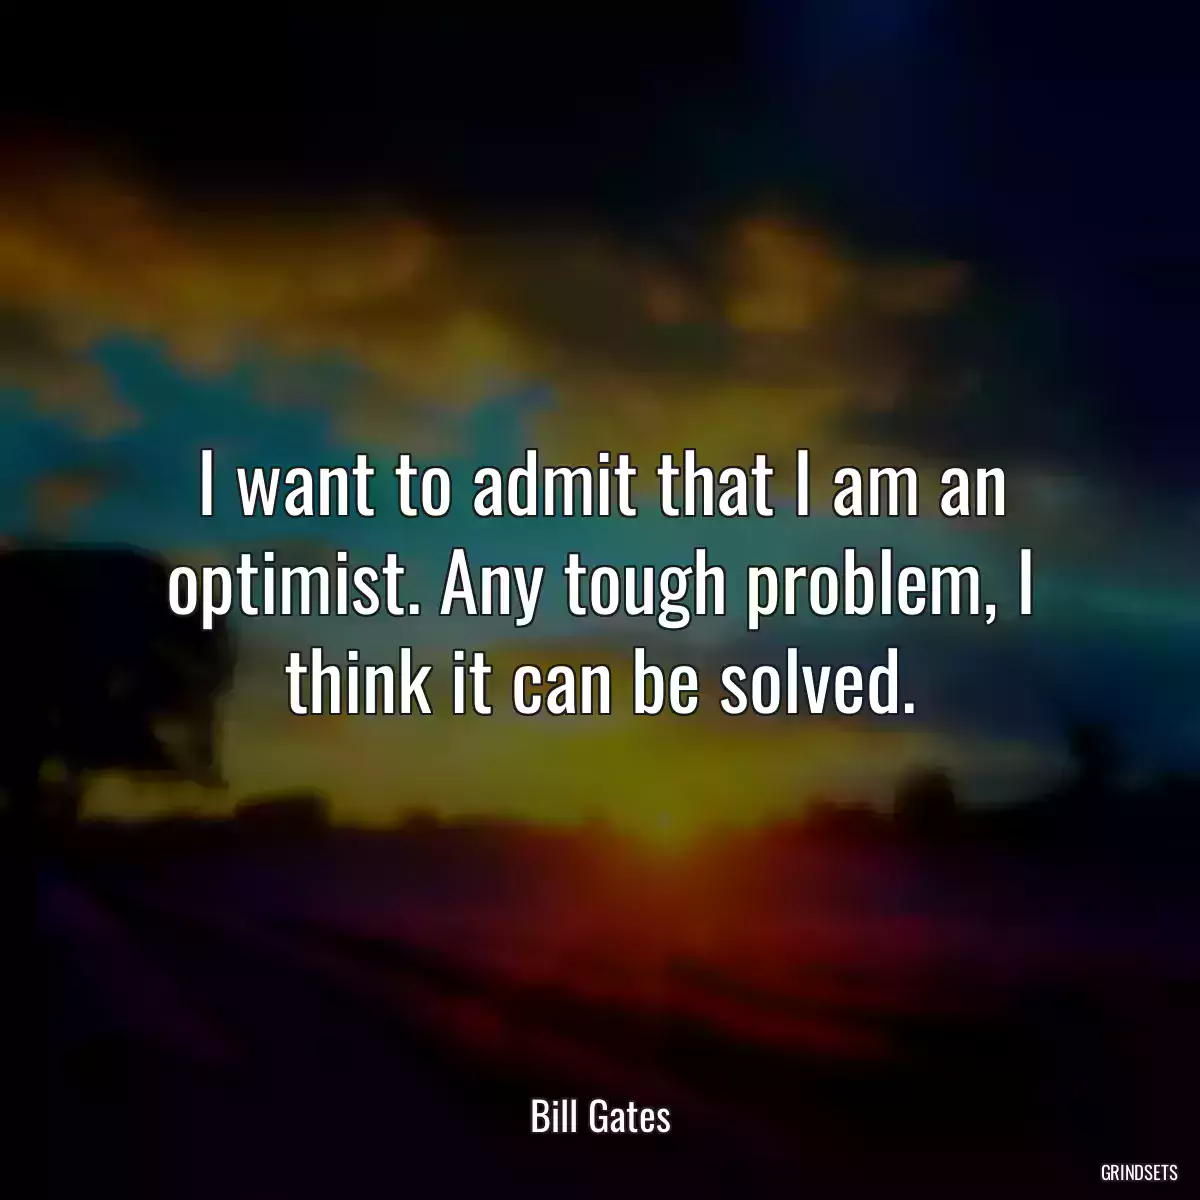 I want to admit that I am an optimist. Any tough problem, I think it can be solved.